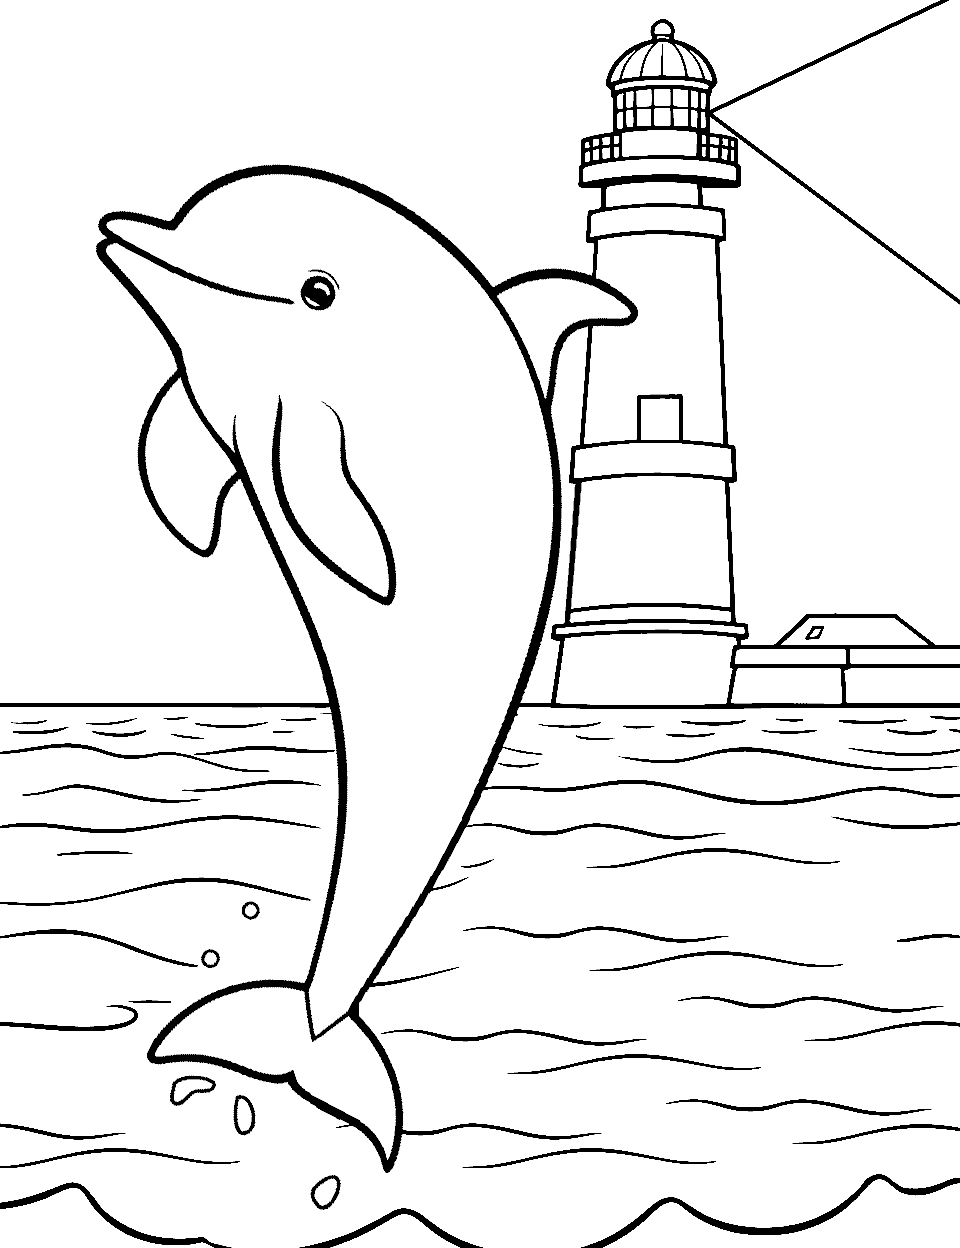 Dolphin Beside the Lighthouse Coloring Page - A dolphin jumping out from the ocean with a simple, distant lighthouse in the backdrop.